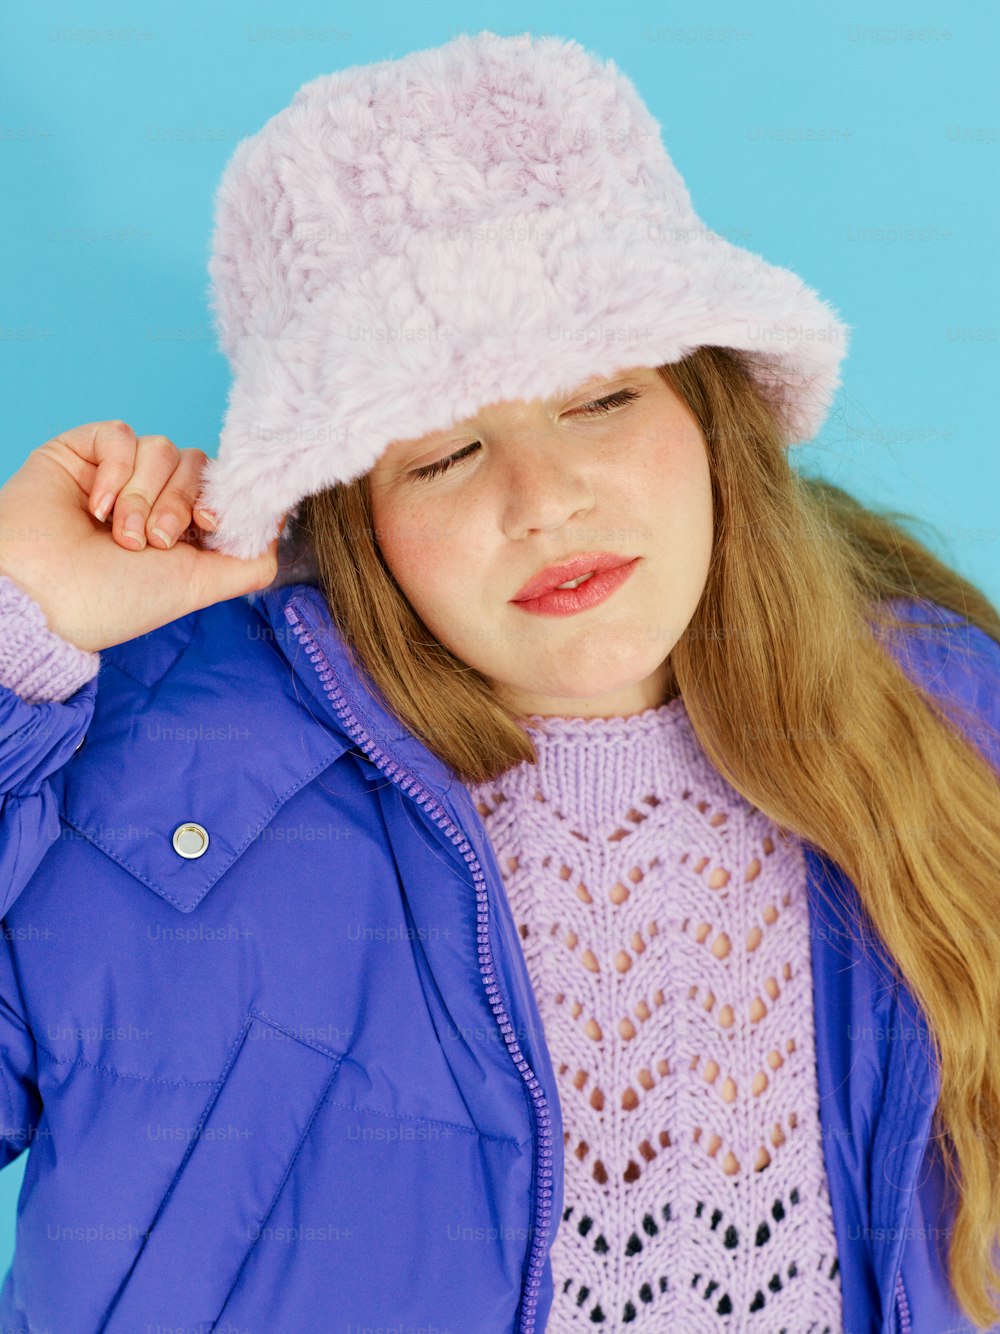 a young girl wearing a purple jacket and a pink hat